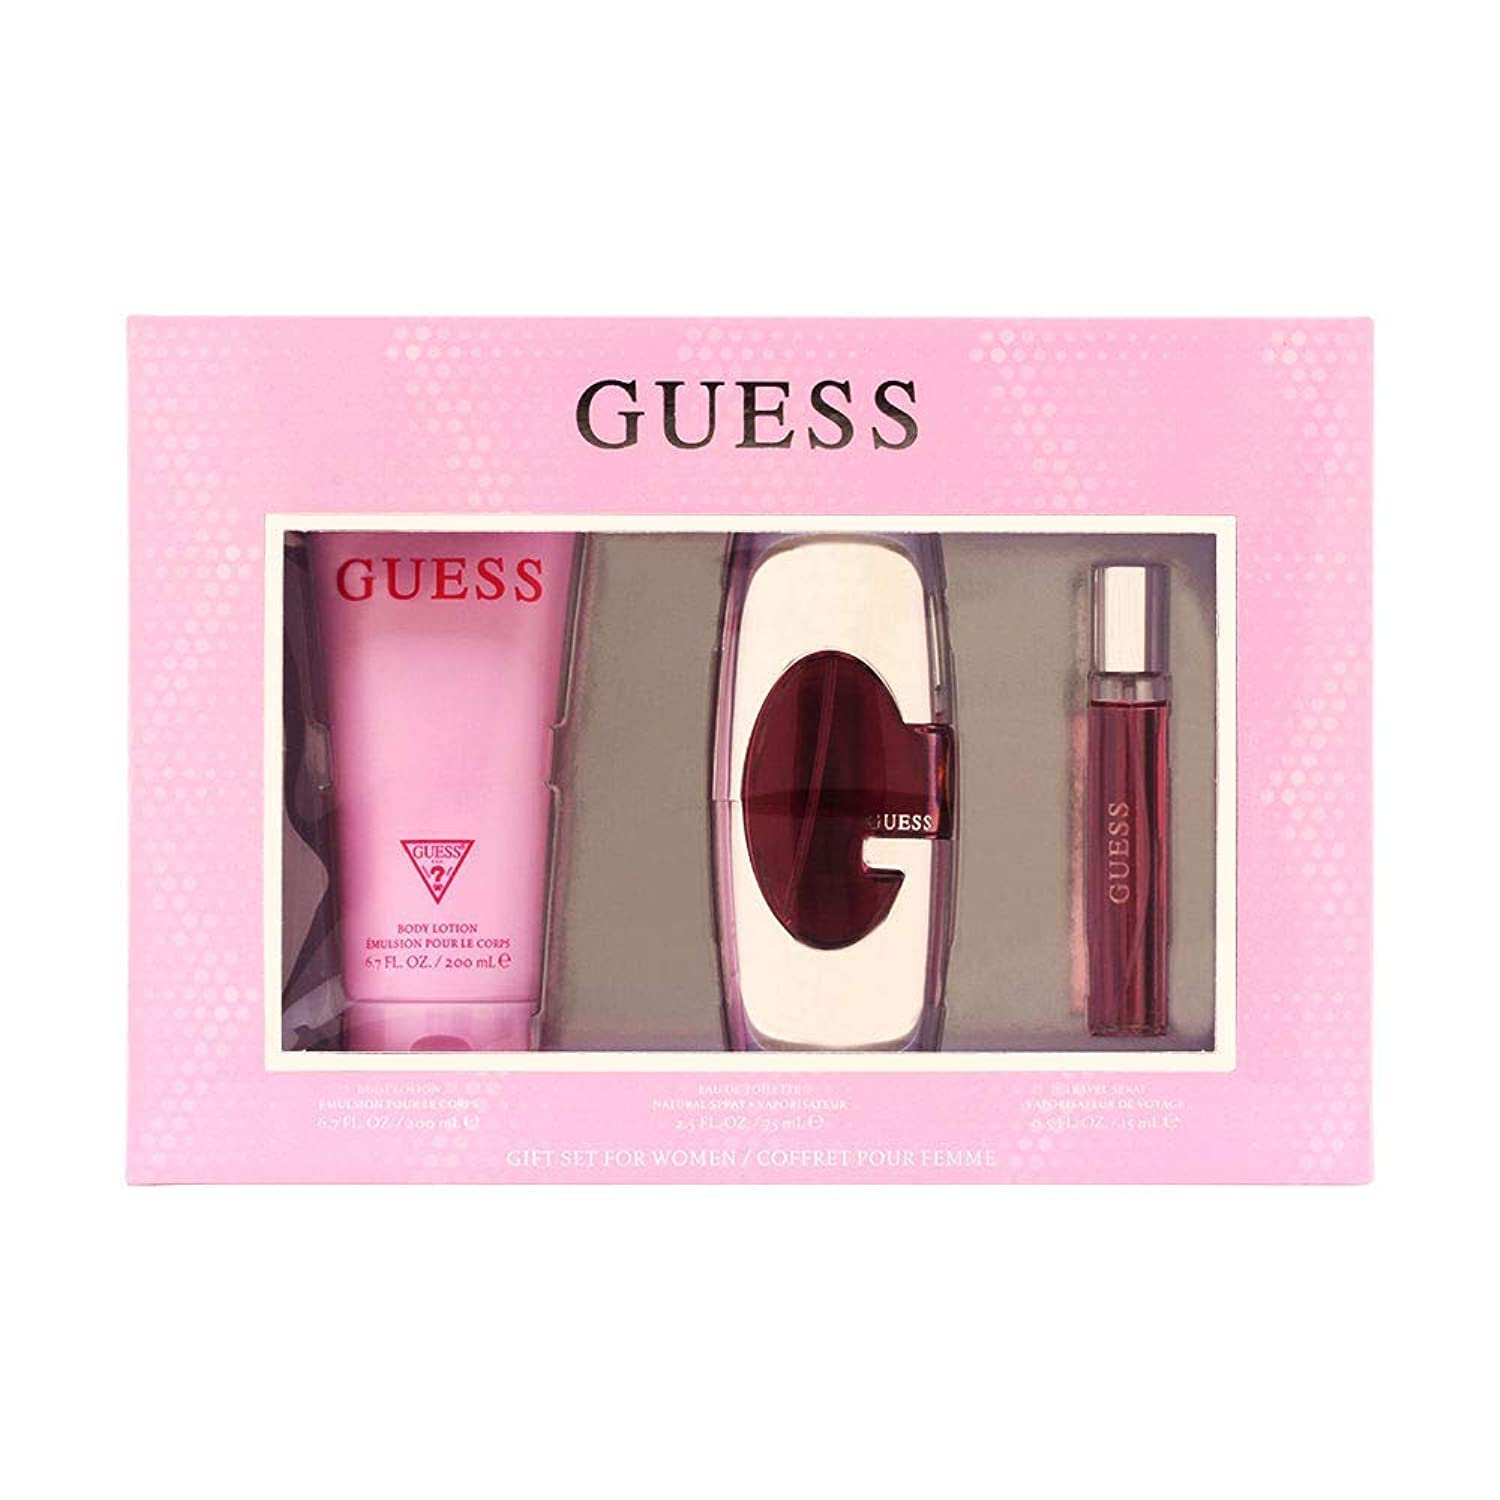 GUESS Pink 3 Pieces Gift Set For Women - 75 ml EDP+ 200 ml Body Lotion +15 ml Travel Spray